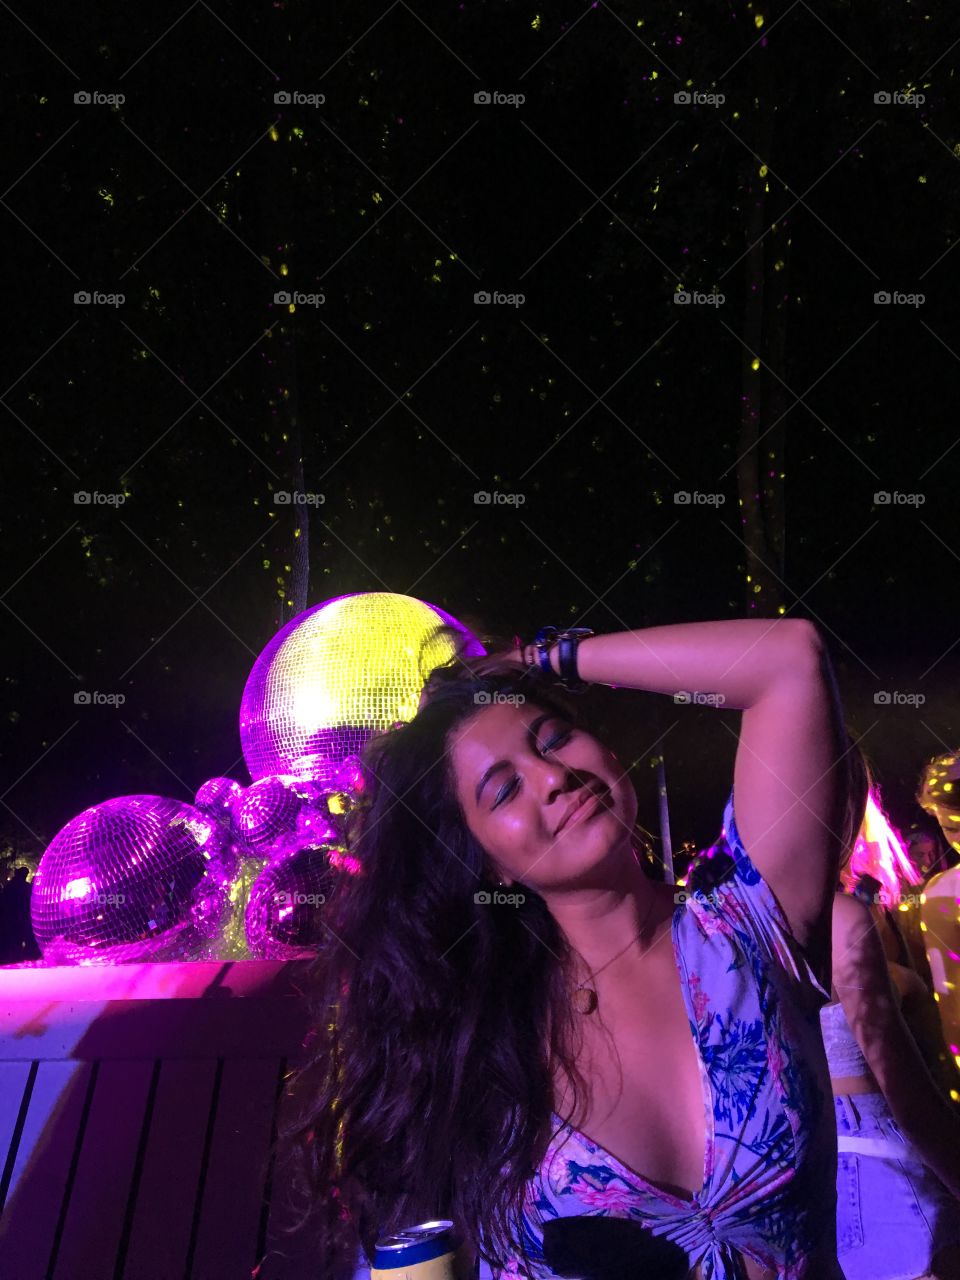 A festival girl poses in front of a disco ball arrangement. It’s the end of the night. The disco balls reflect purple & gold light into the tall dark trees in the background. Her eyes closed, dark hair to the left, a hand resting behind her head.